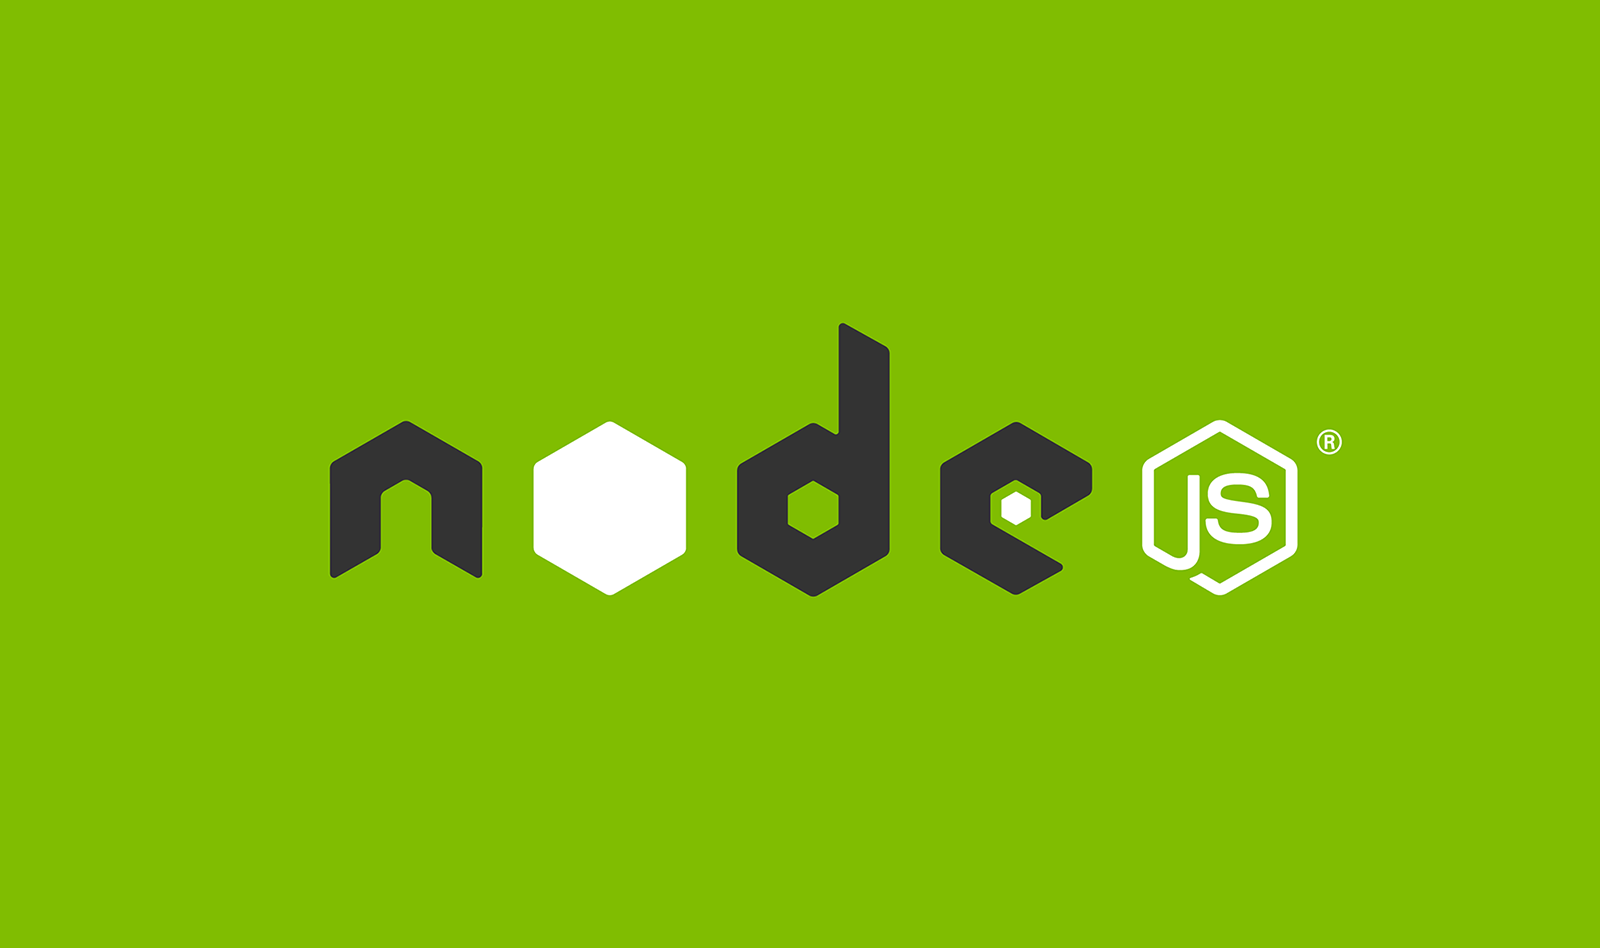 Why Node.js use for backend?